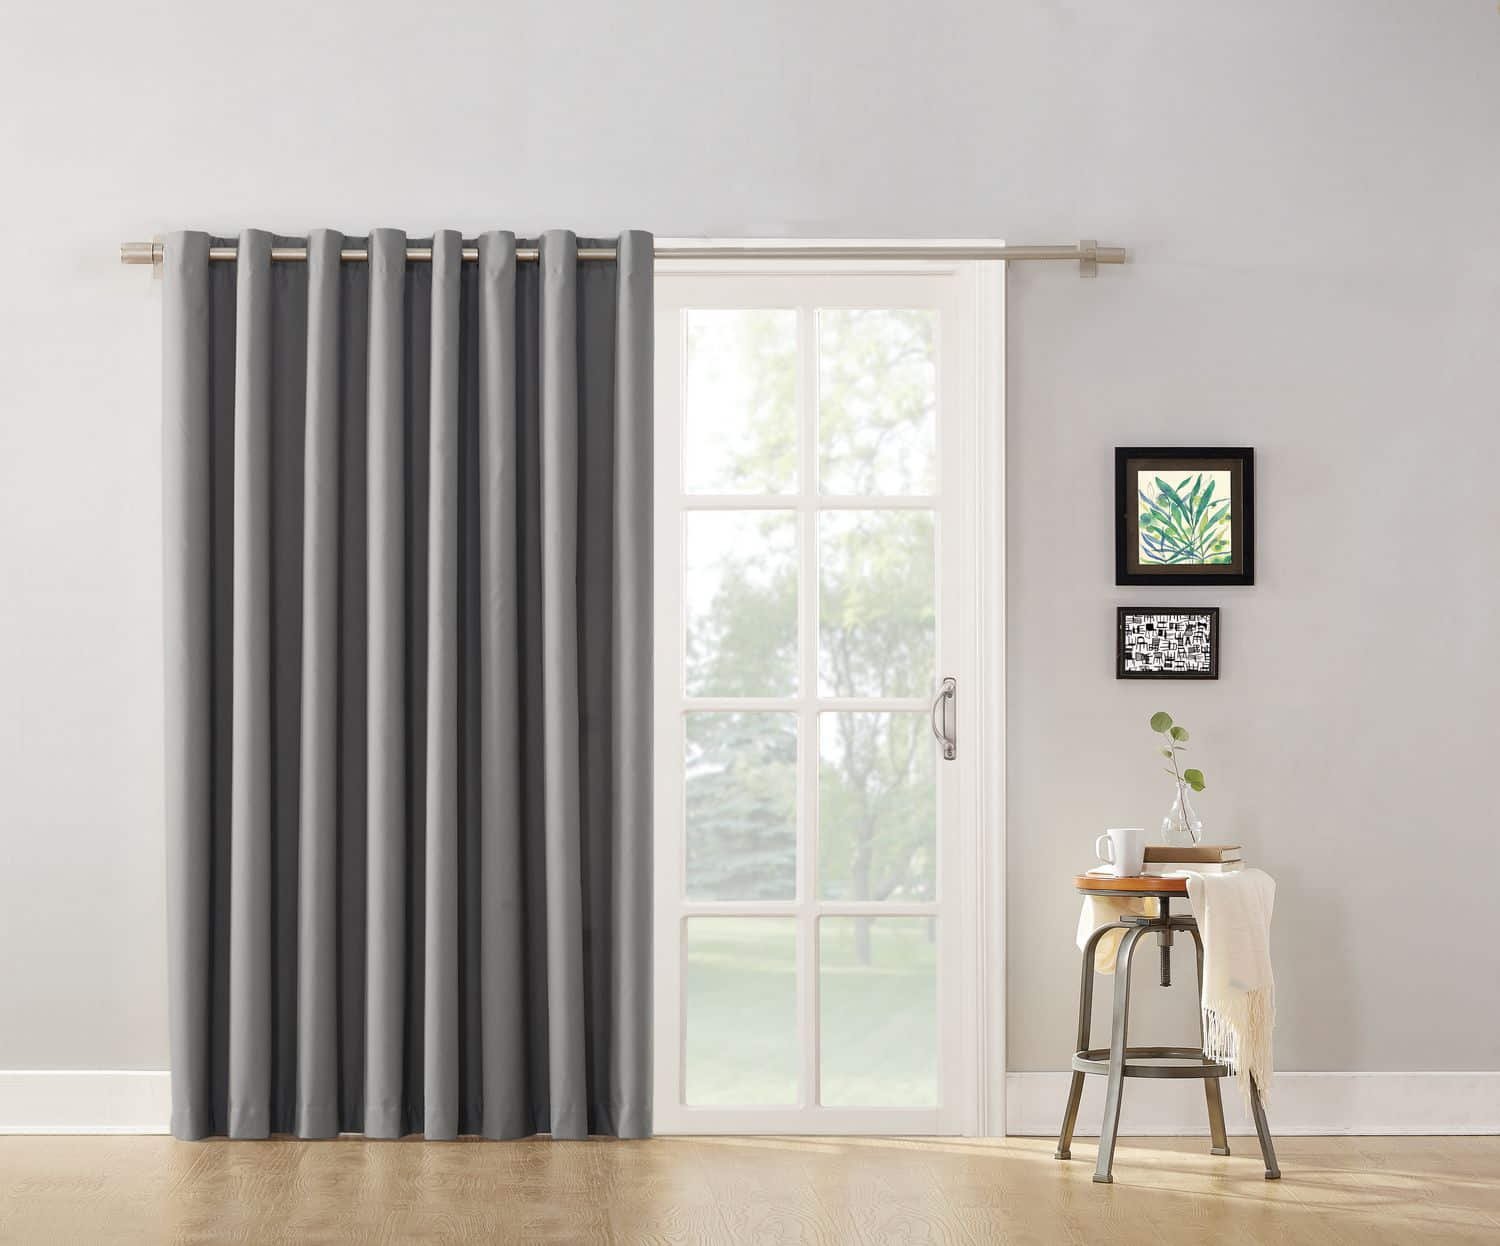 Tips for Installing Blackout Curtains in Your Home